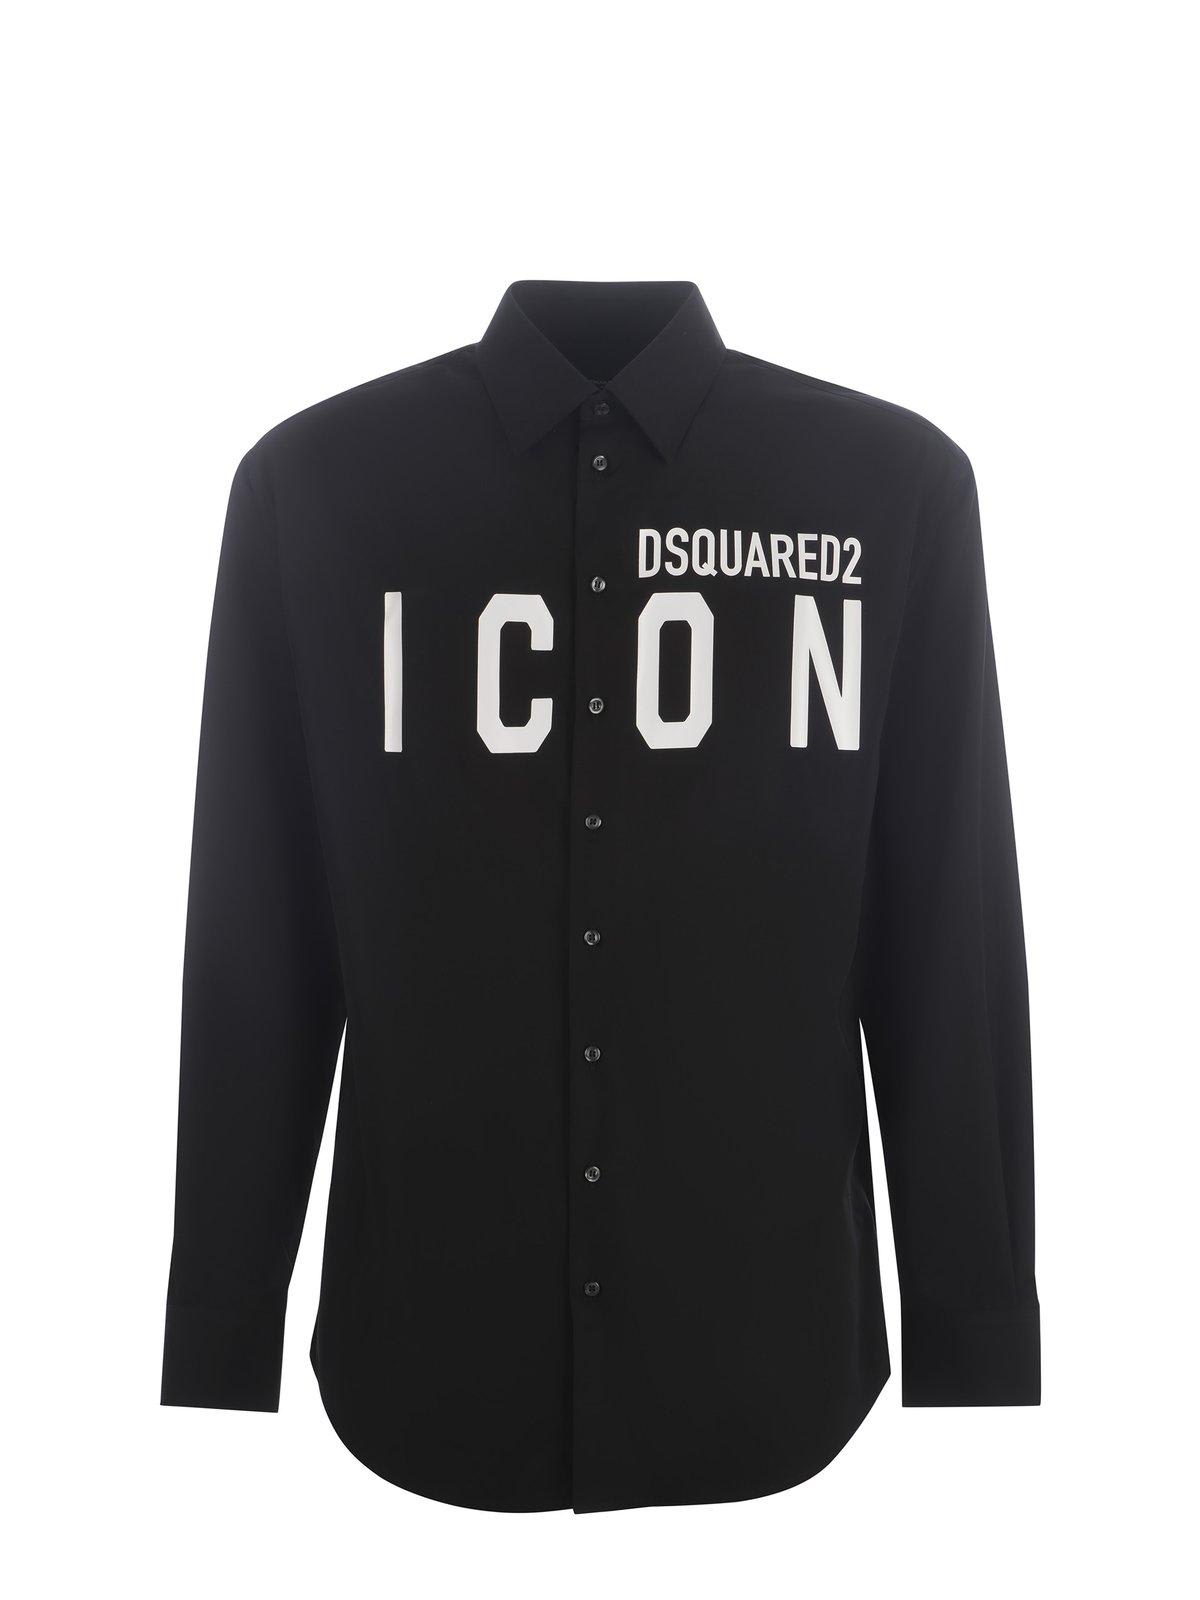 DSQUARED2 LOGO PRINTED BUTTONED SHIRT